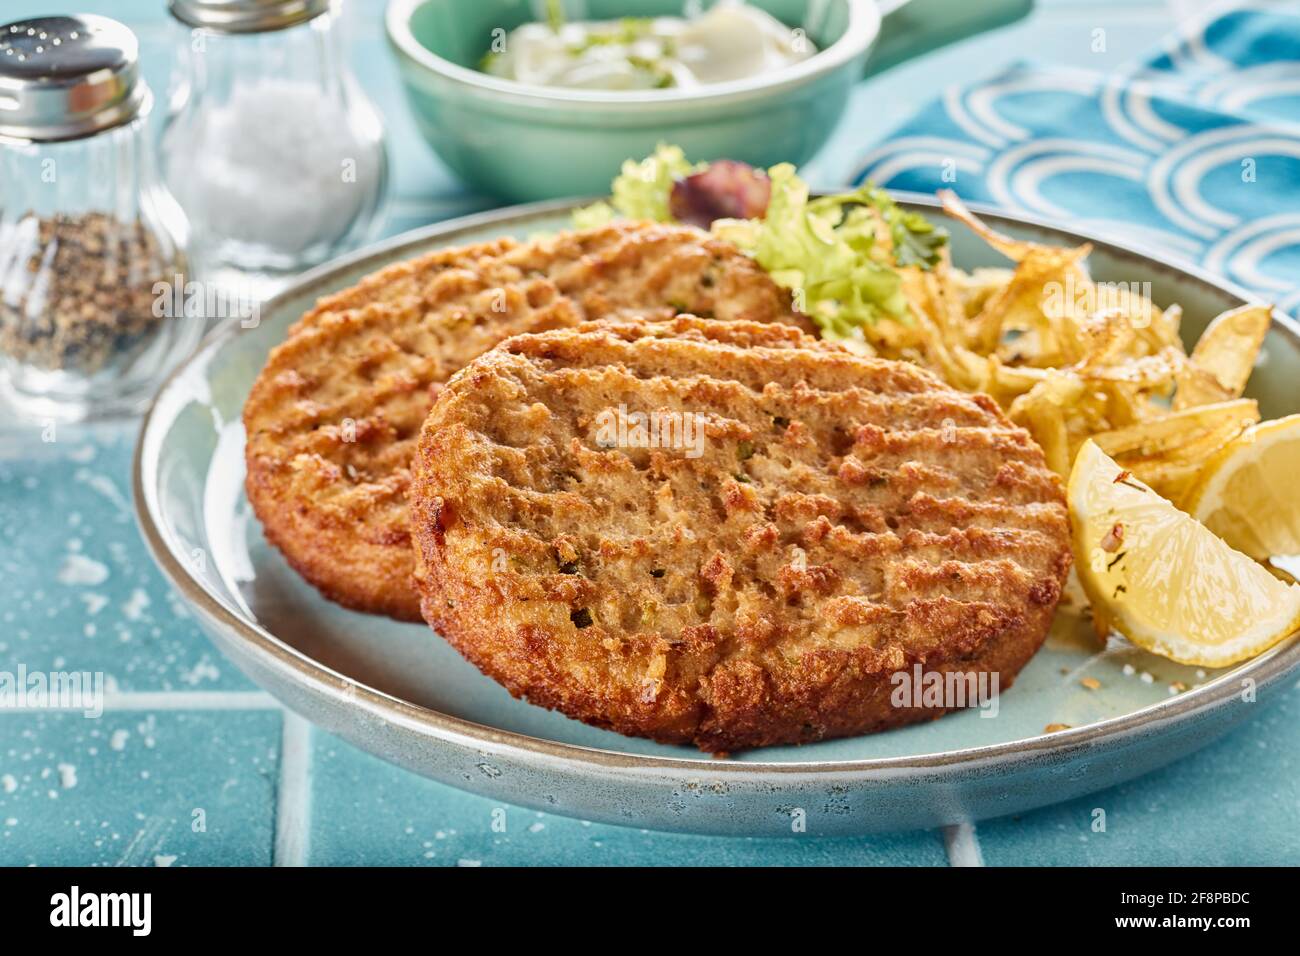 Closeup of appetizing homemade fried fish patties and fries served with fresh lettuce and lemon on table with sauce Stock Photo